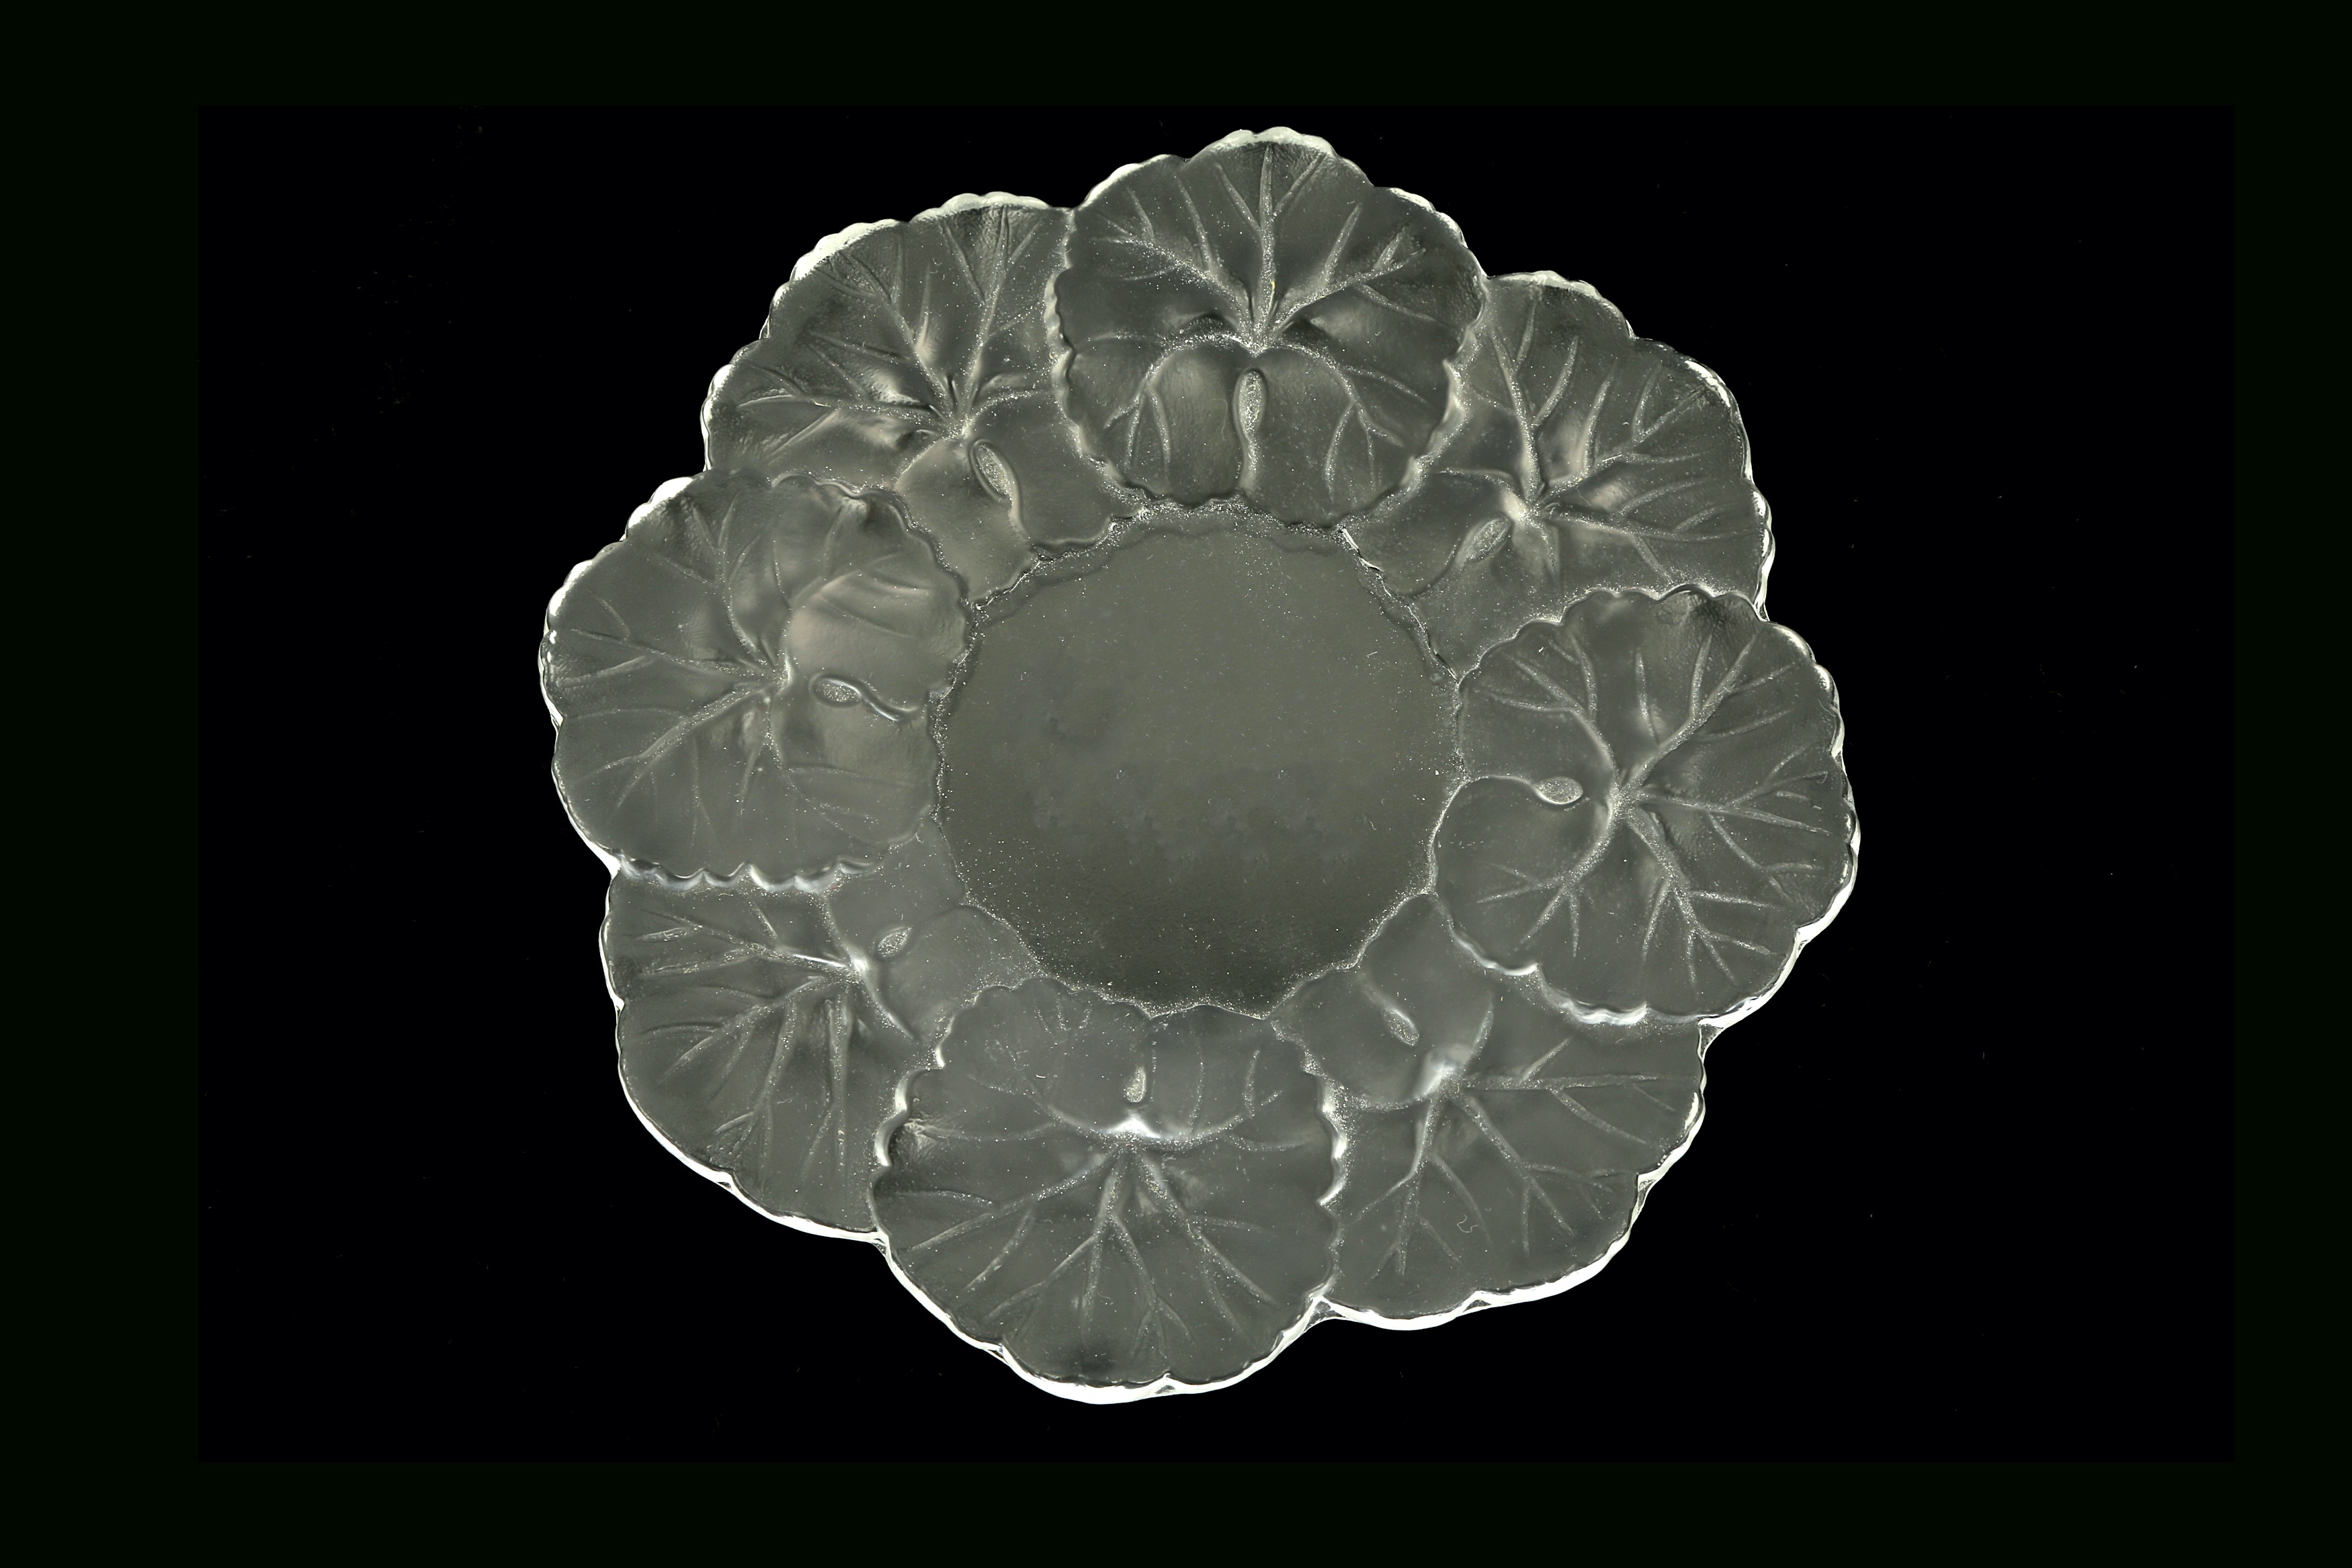 A 20th century Lalique France 'Honfleur' glass plate, of small circular form with a leaf pattern